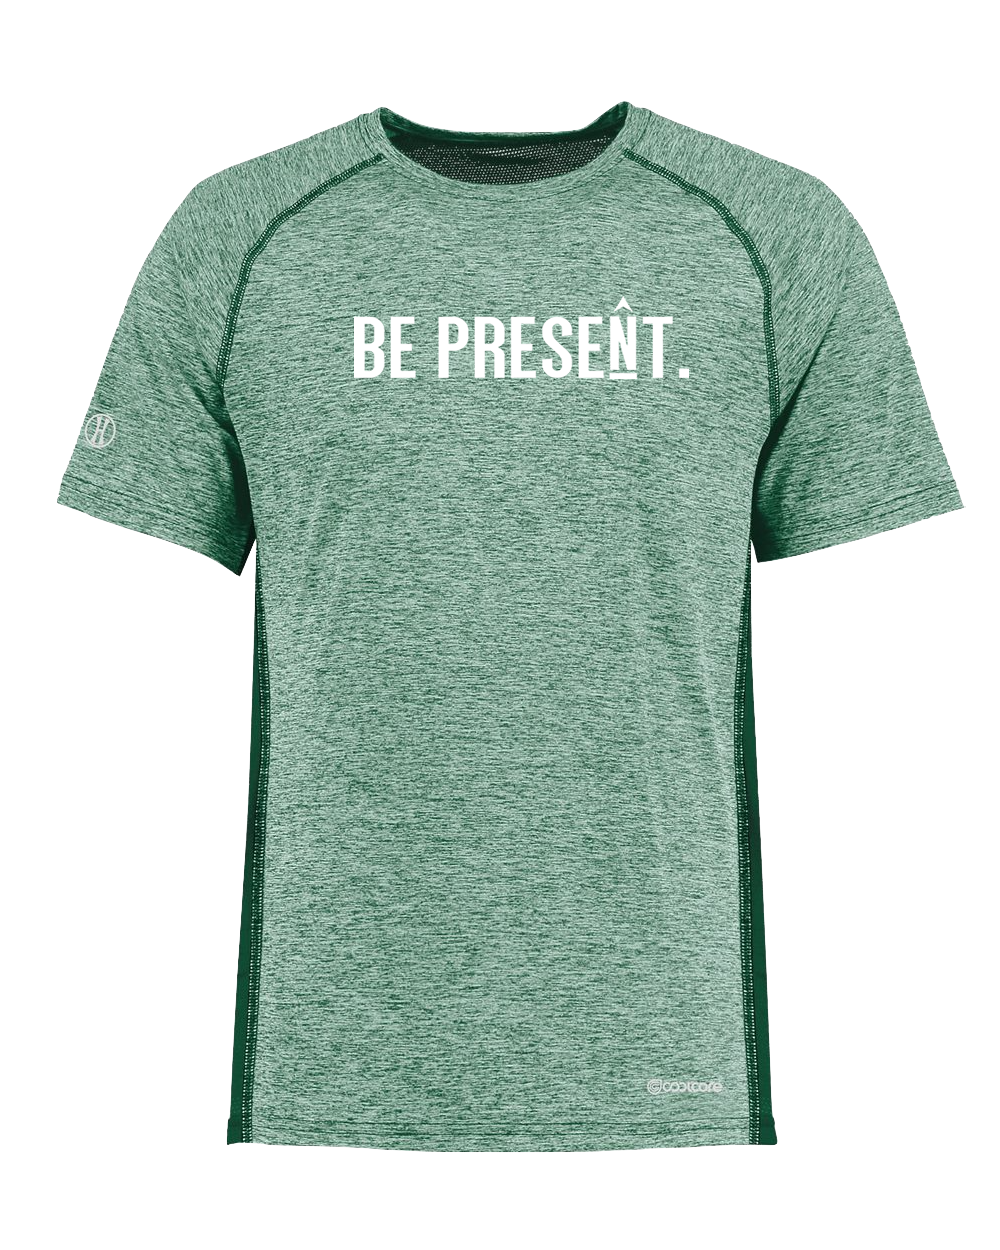 BE PRESENT. FULL CHEST Poly/Elastane High Performance T-Shirt with UPF 50+